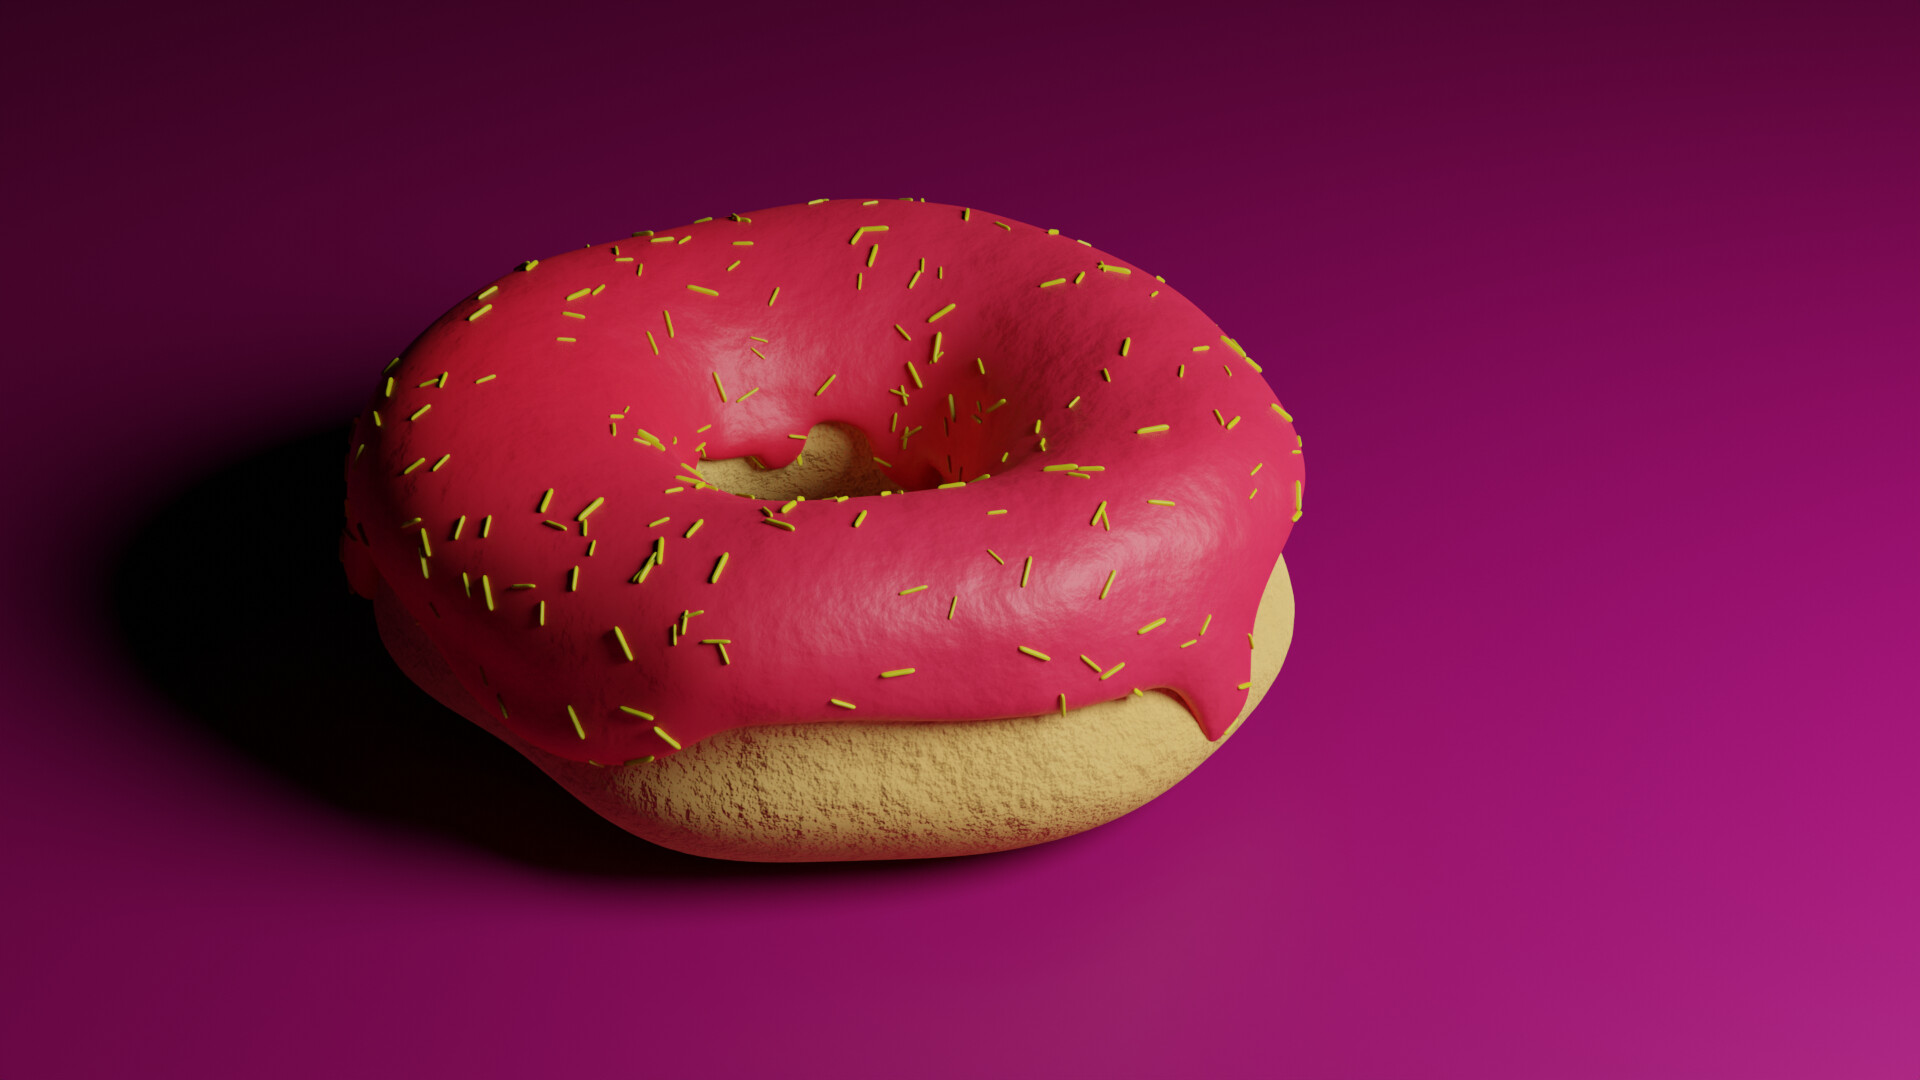 ArtStation - Donuts with red icing and sprinkles